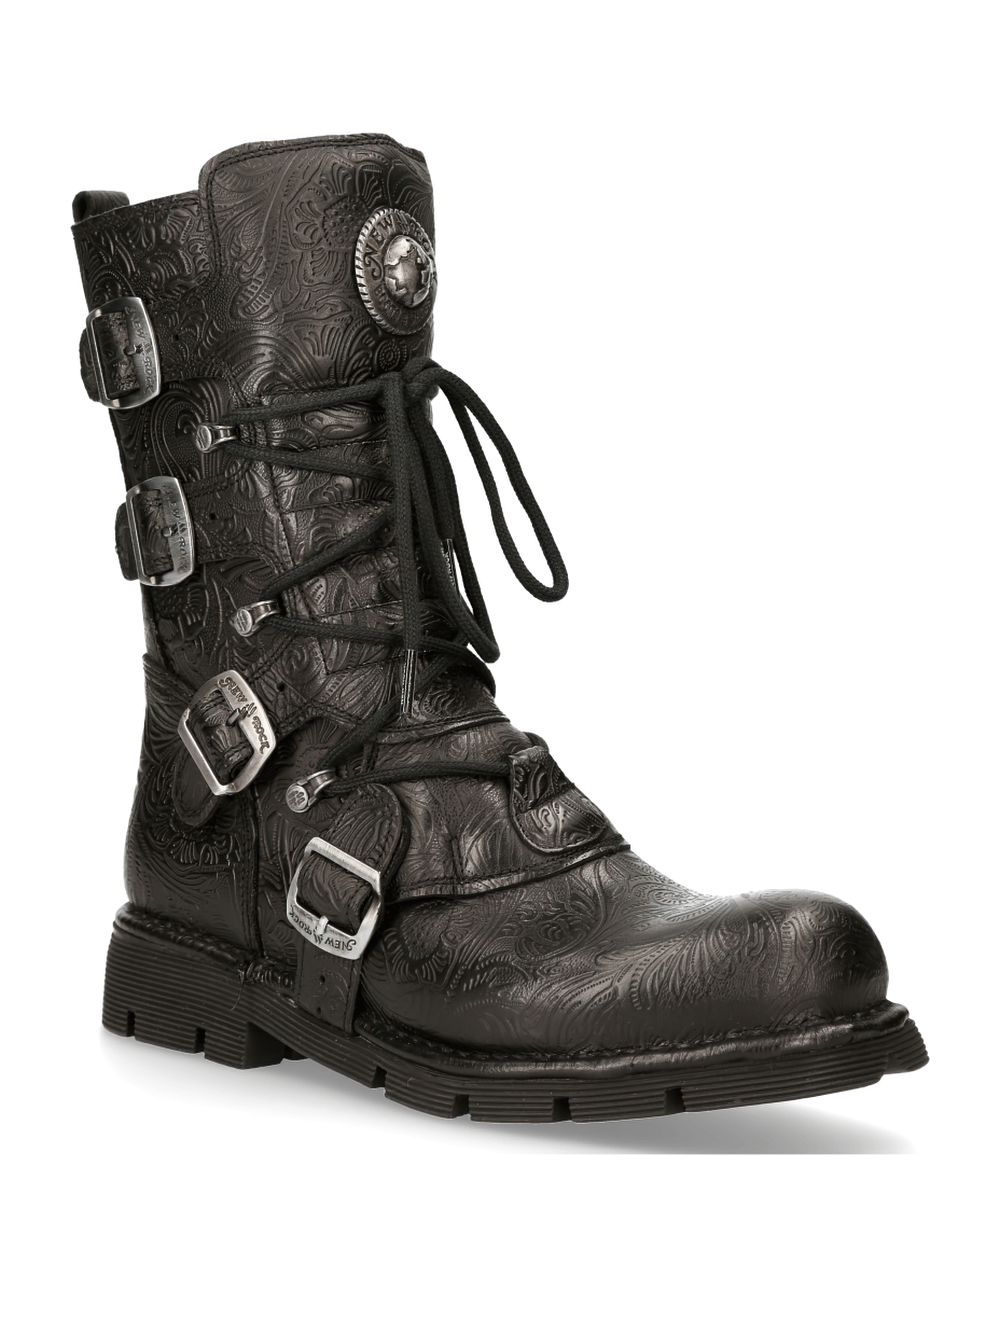 NEW ROCK Black Gothic Engraved Leather Boots with Buckles